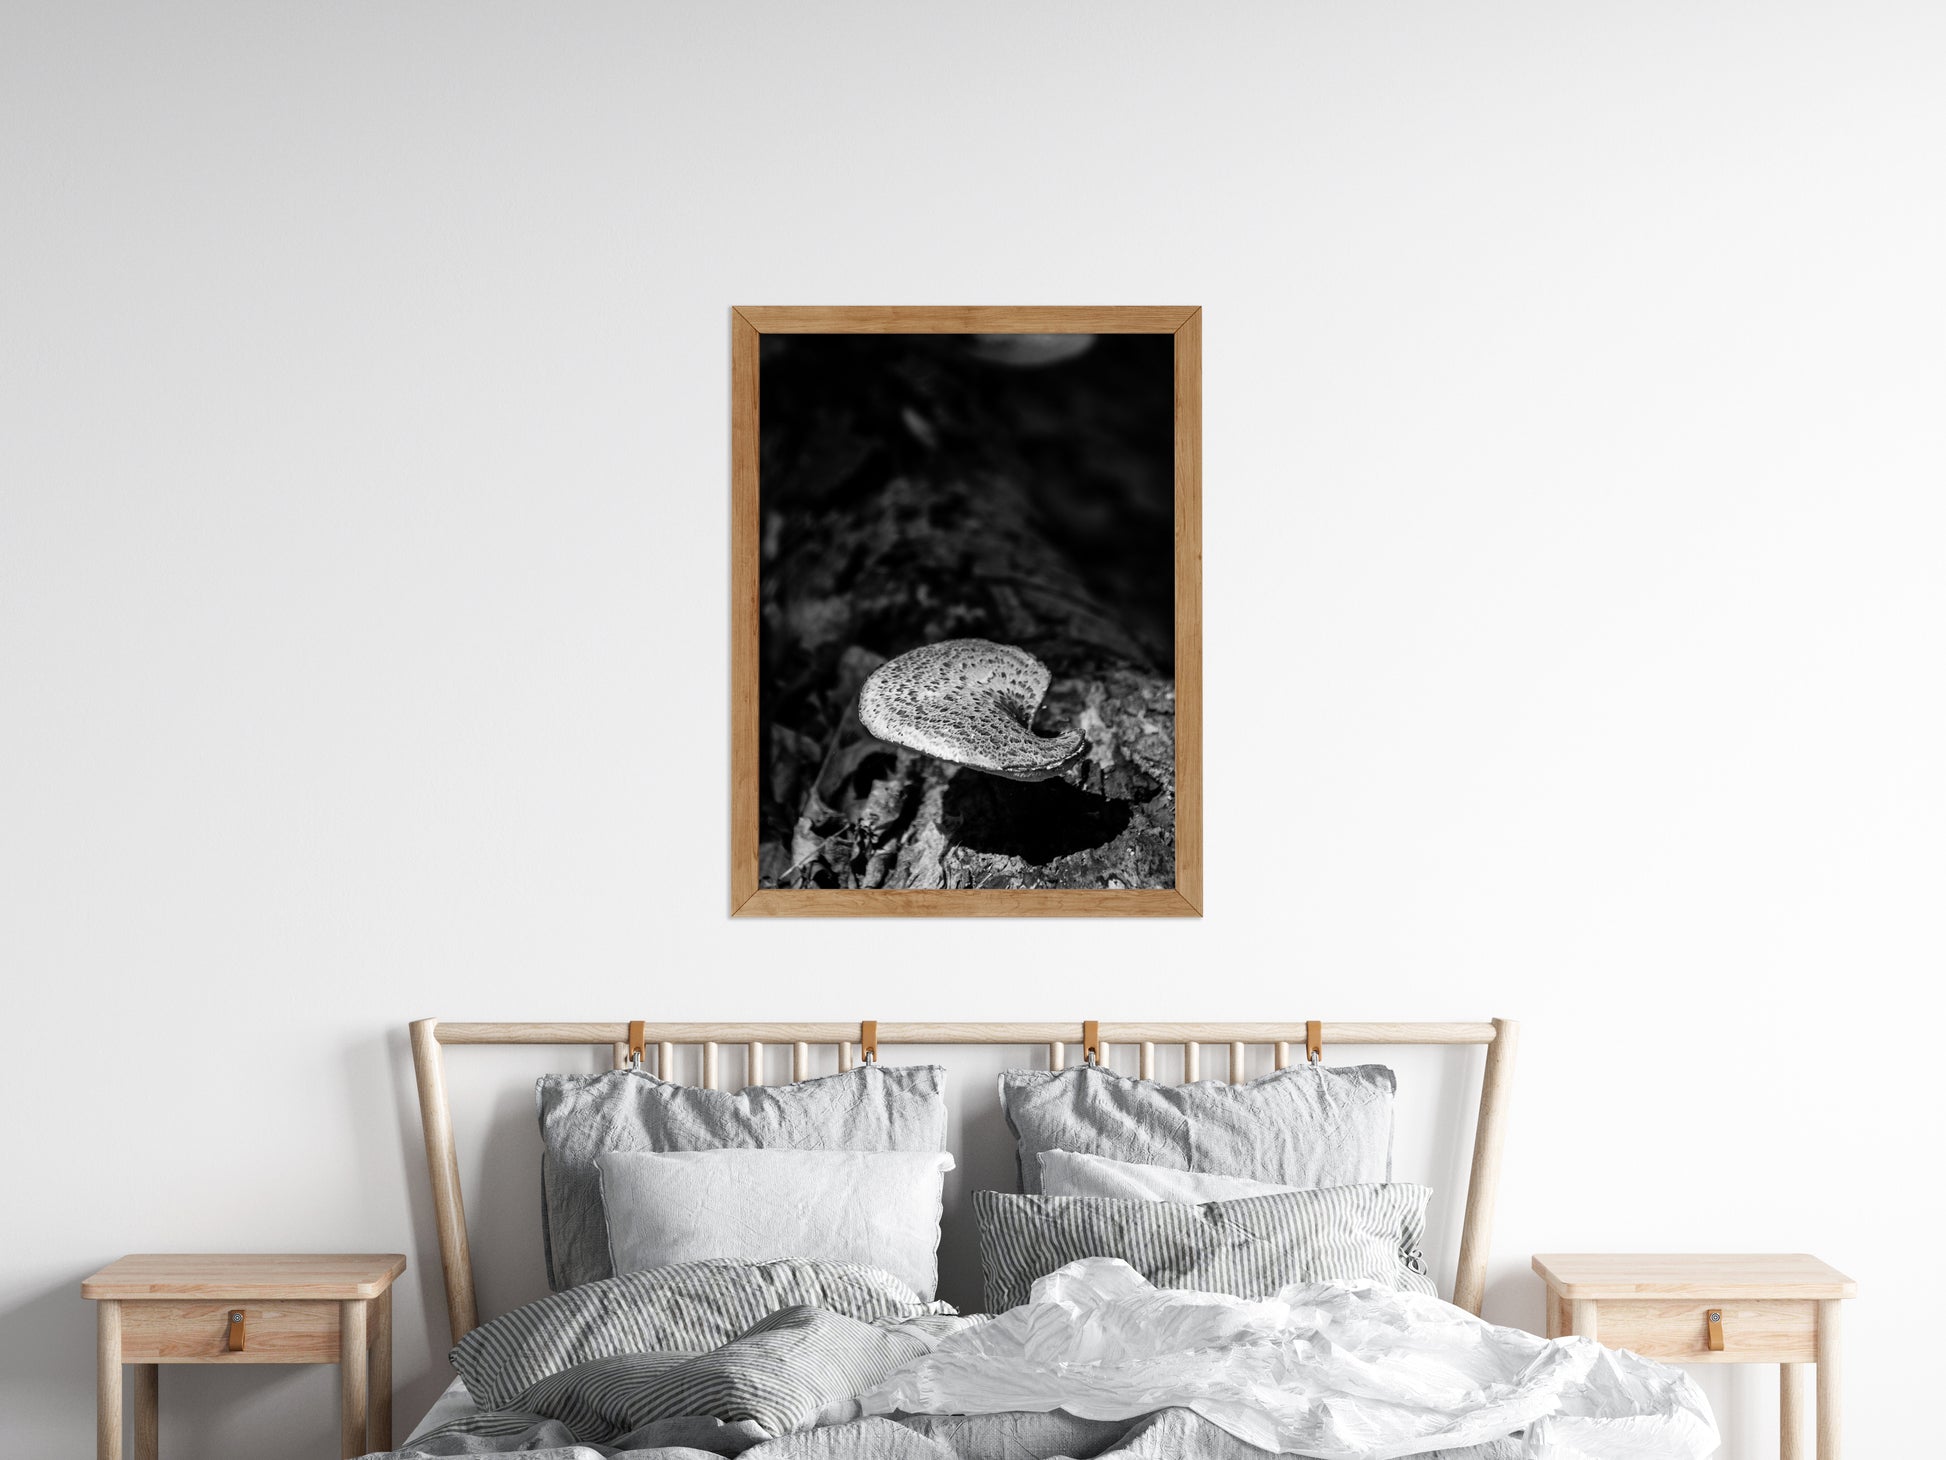 Art Bedroom Wall: Mushroom on Log in Black & White Rustic / Country Style Nature Photo Framed Wall Art Print